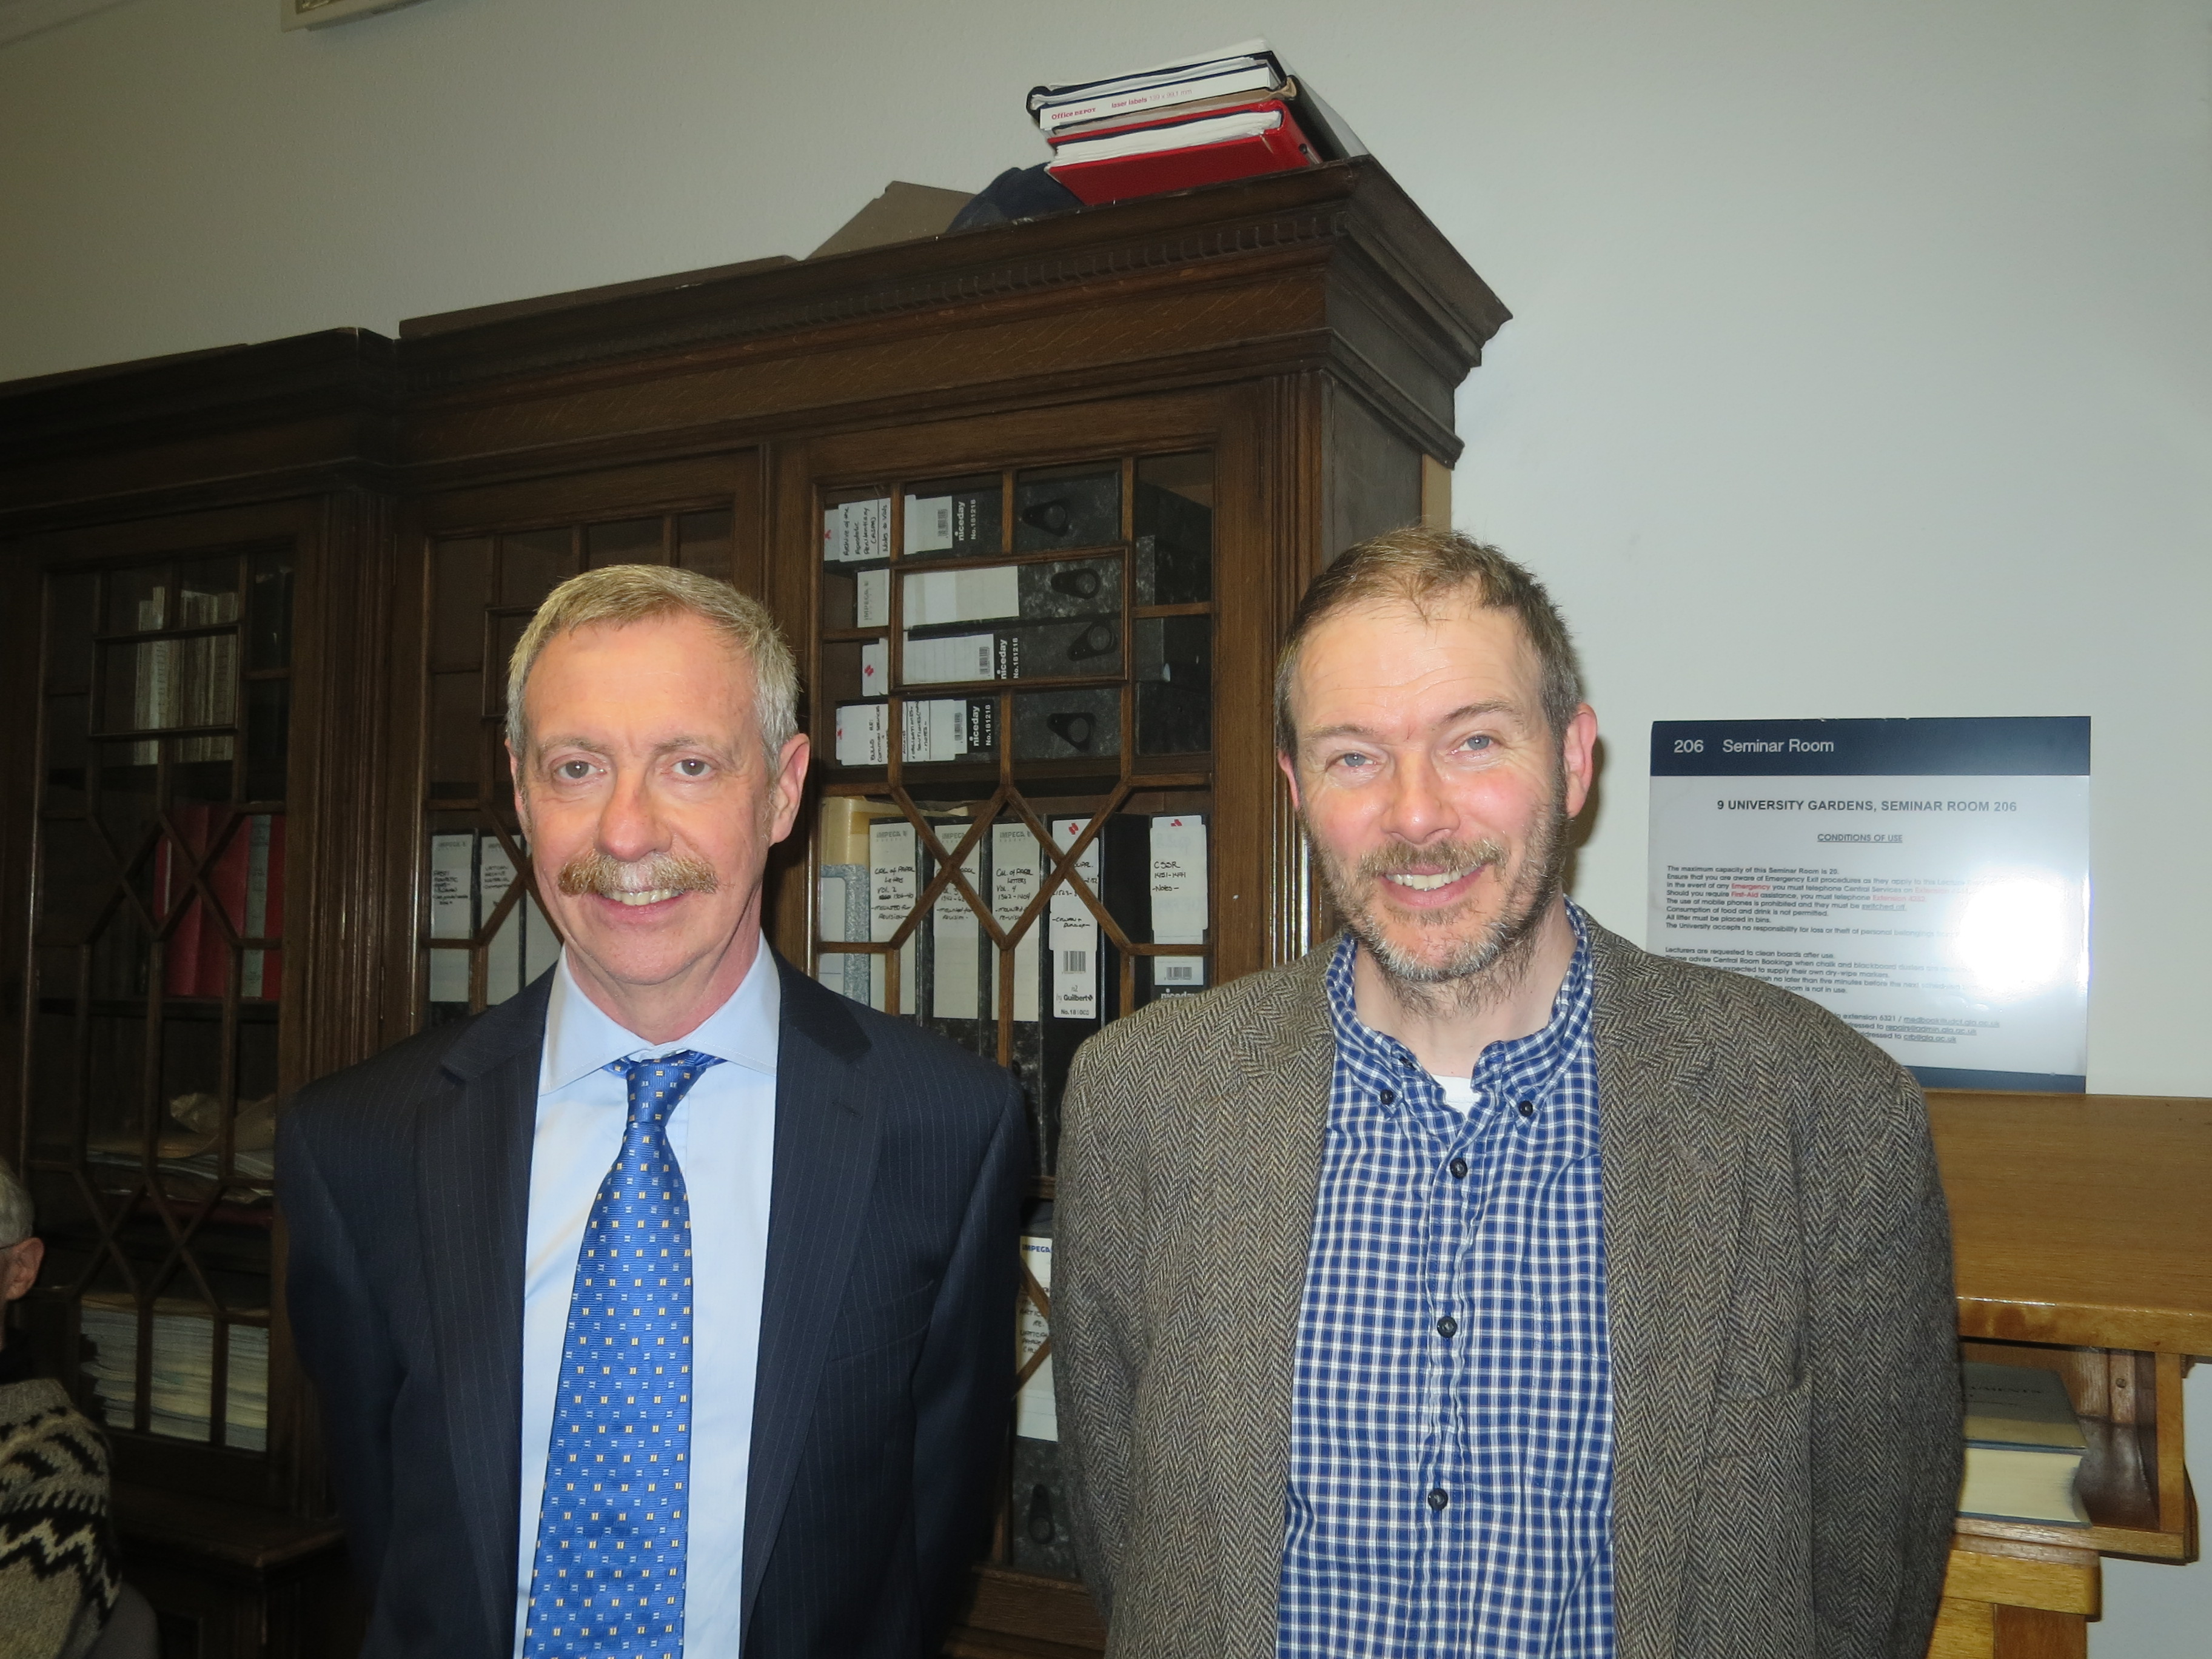 Dr. Alan Macquarrie with Dr. Martin MacGregor after the Second Annual John Durkan Memorial Lecture.